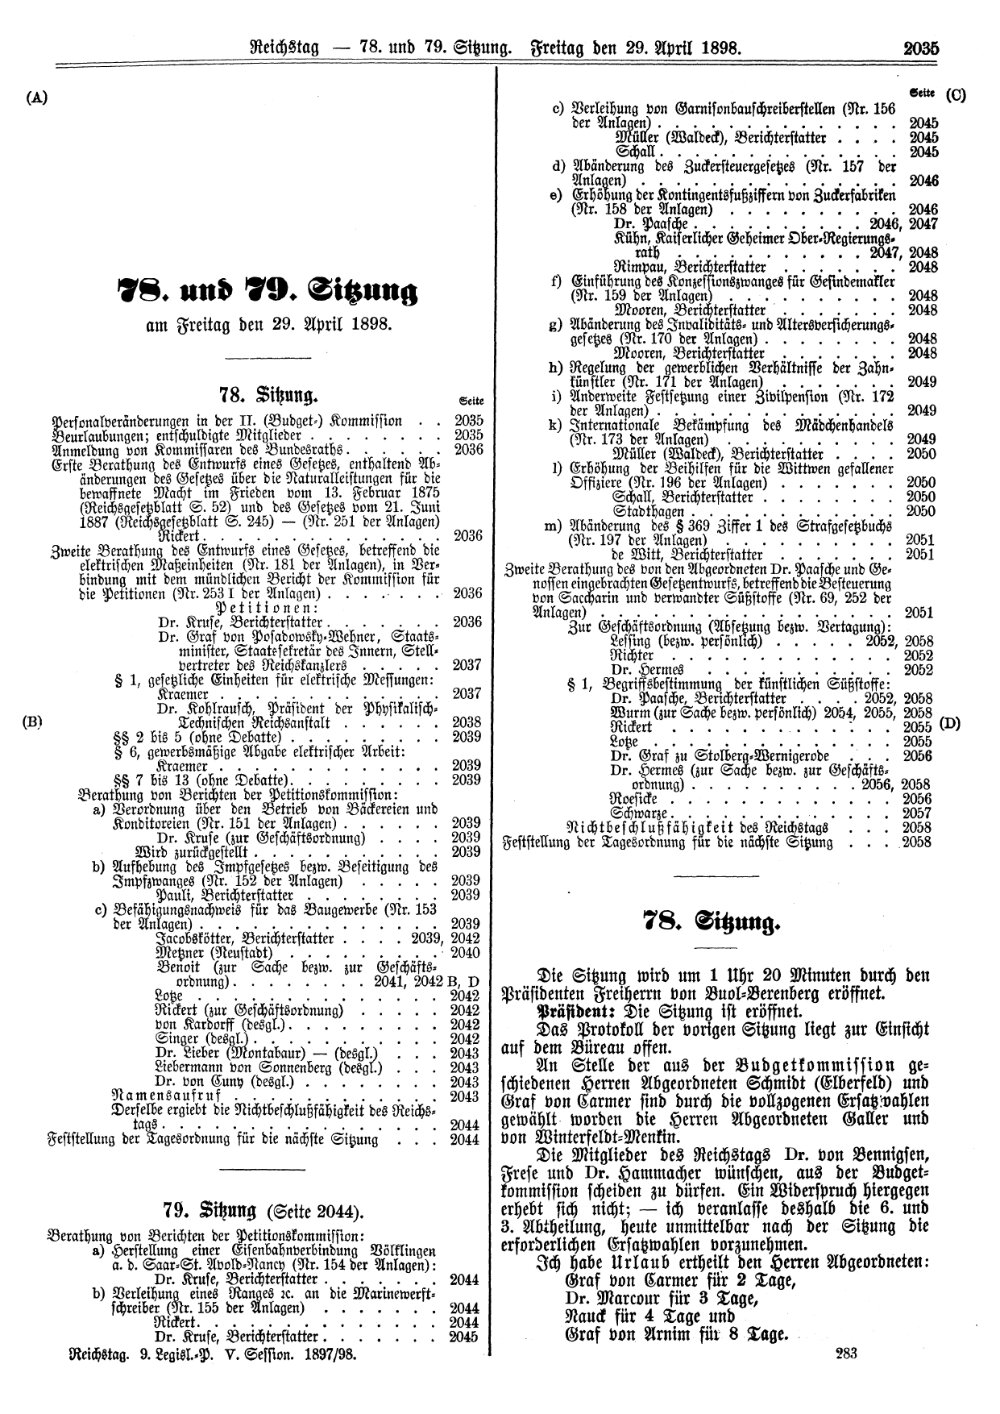 Scan of page 2035